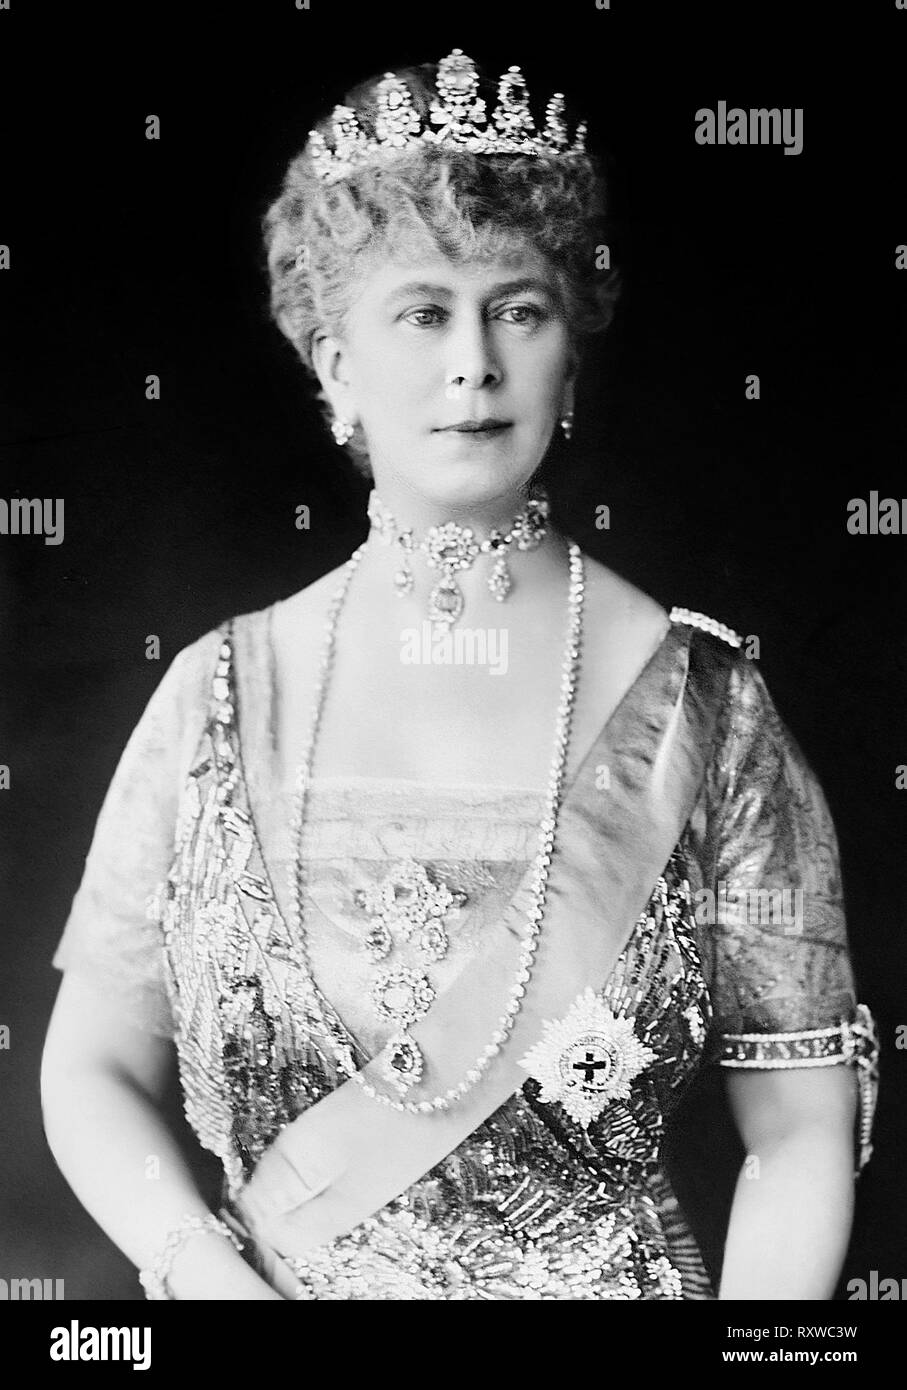 Queen Mary in tiara and gown wearing a choker necklace and a string of pearls- Mary of Teck was the Queen of the United Kingdom and Empress of India as the wife of George V. Before his accession, she was successively Duchess of York, Duchess of Cornwall and Princess of Wales. Stock Photo